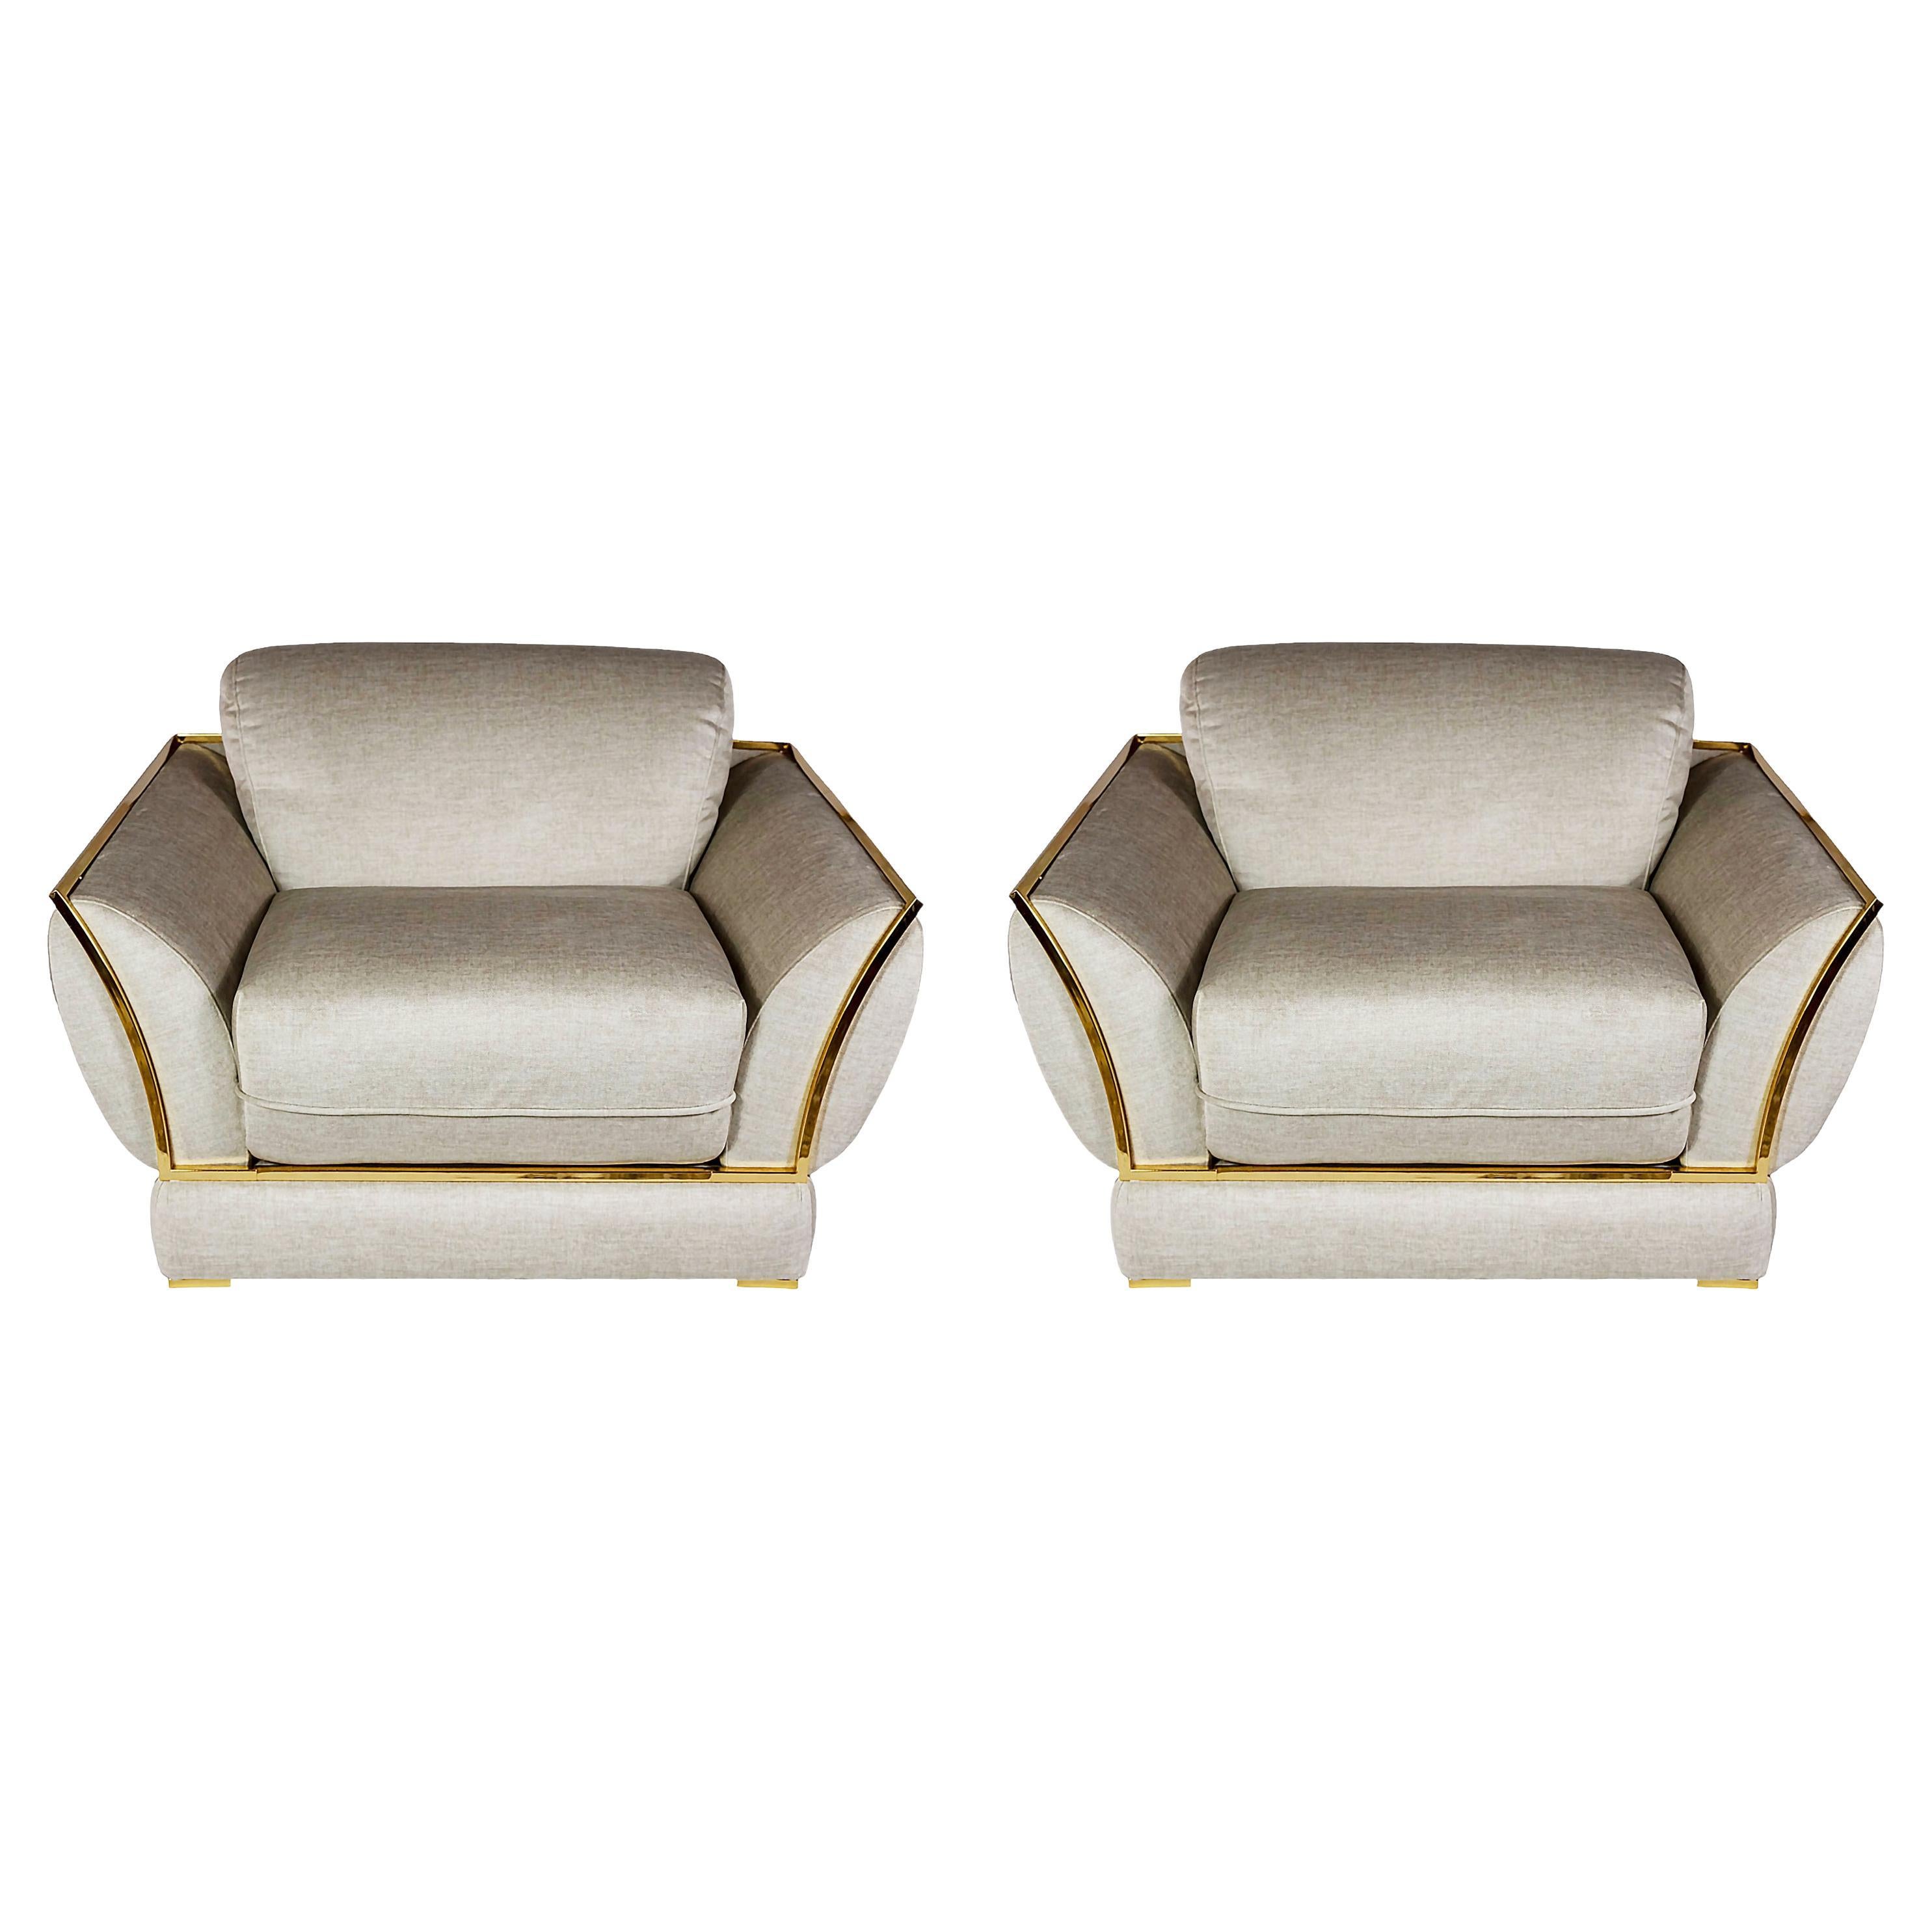 Pair of Italian Armchairs in Velour and Gilt Metal by Alberto Smania, 1970's For Sale